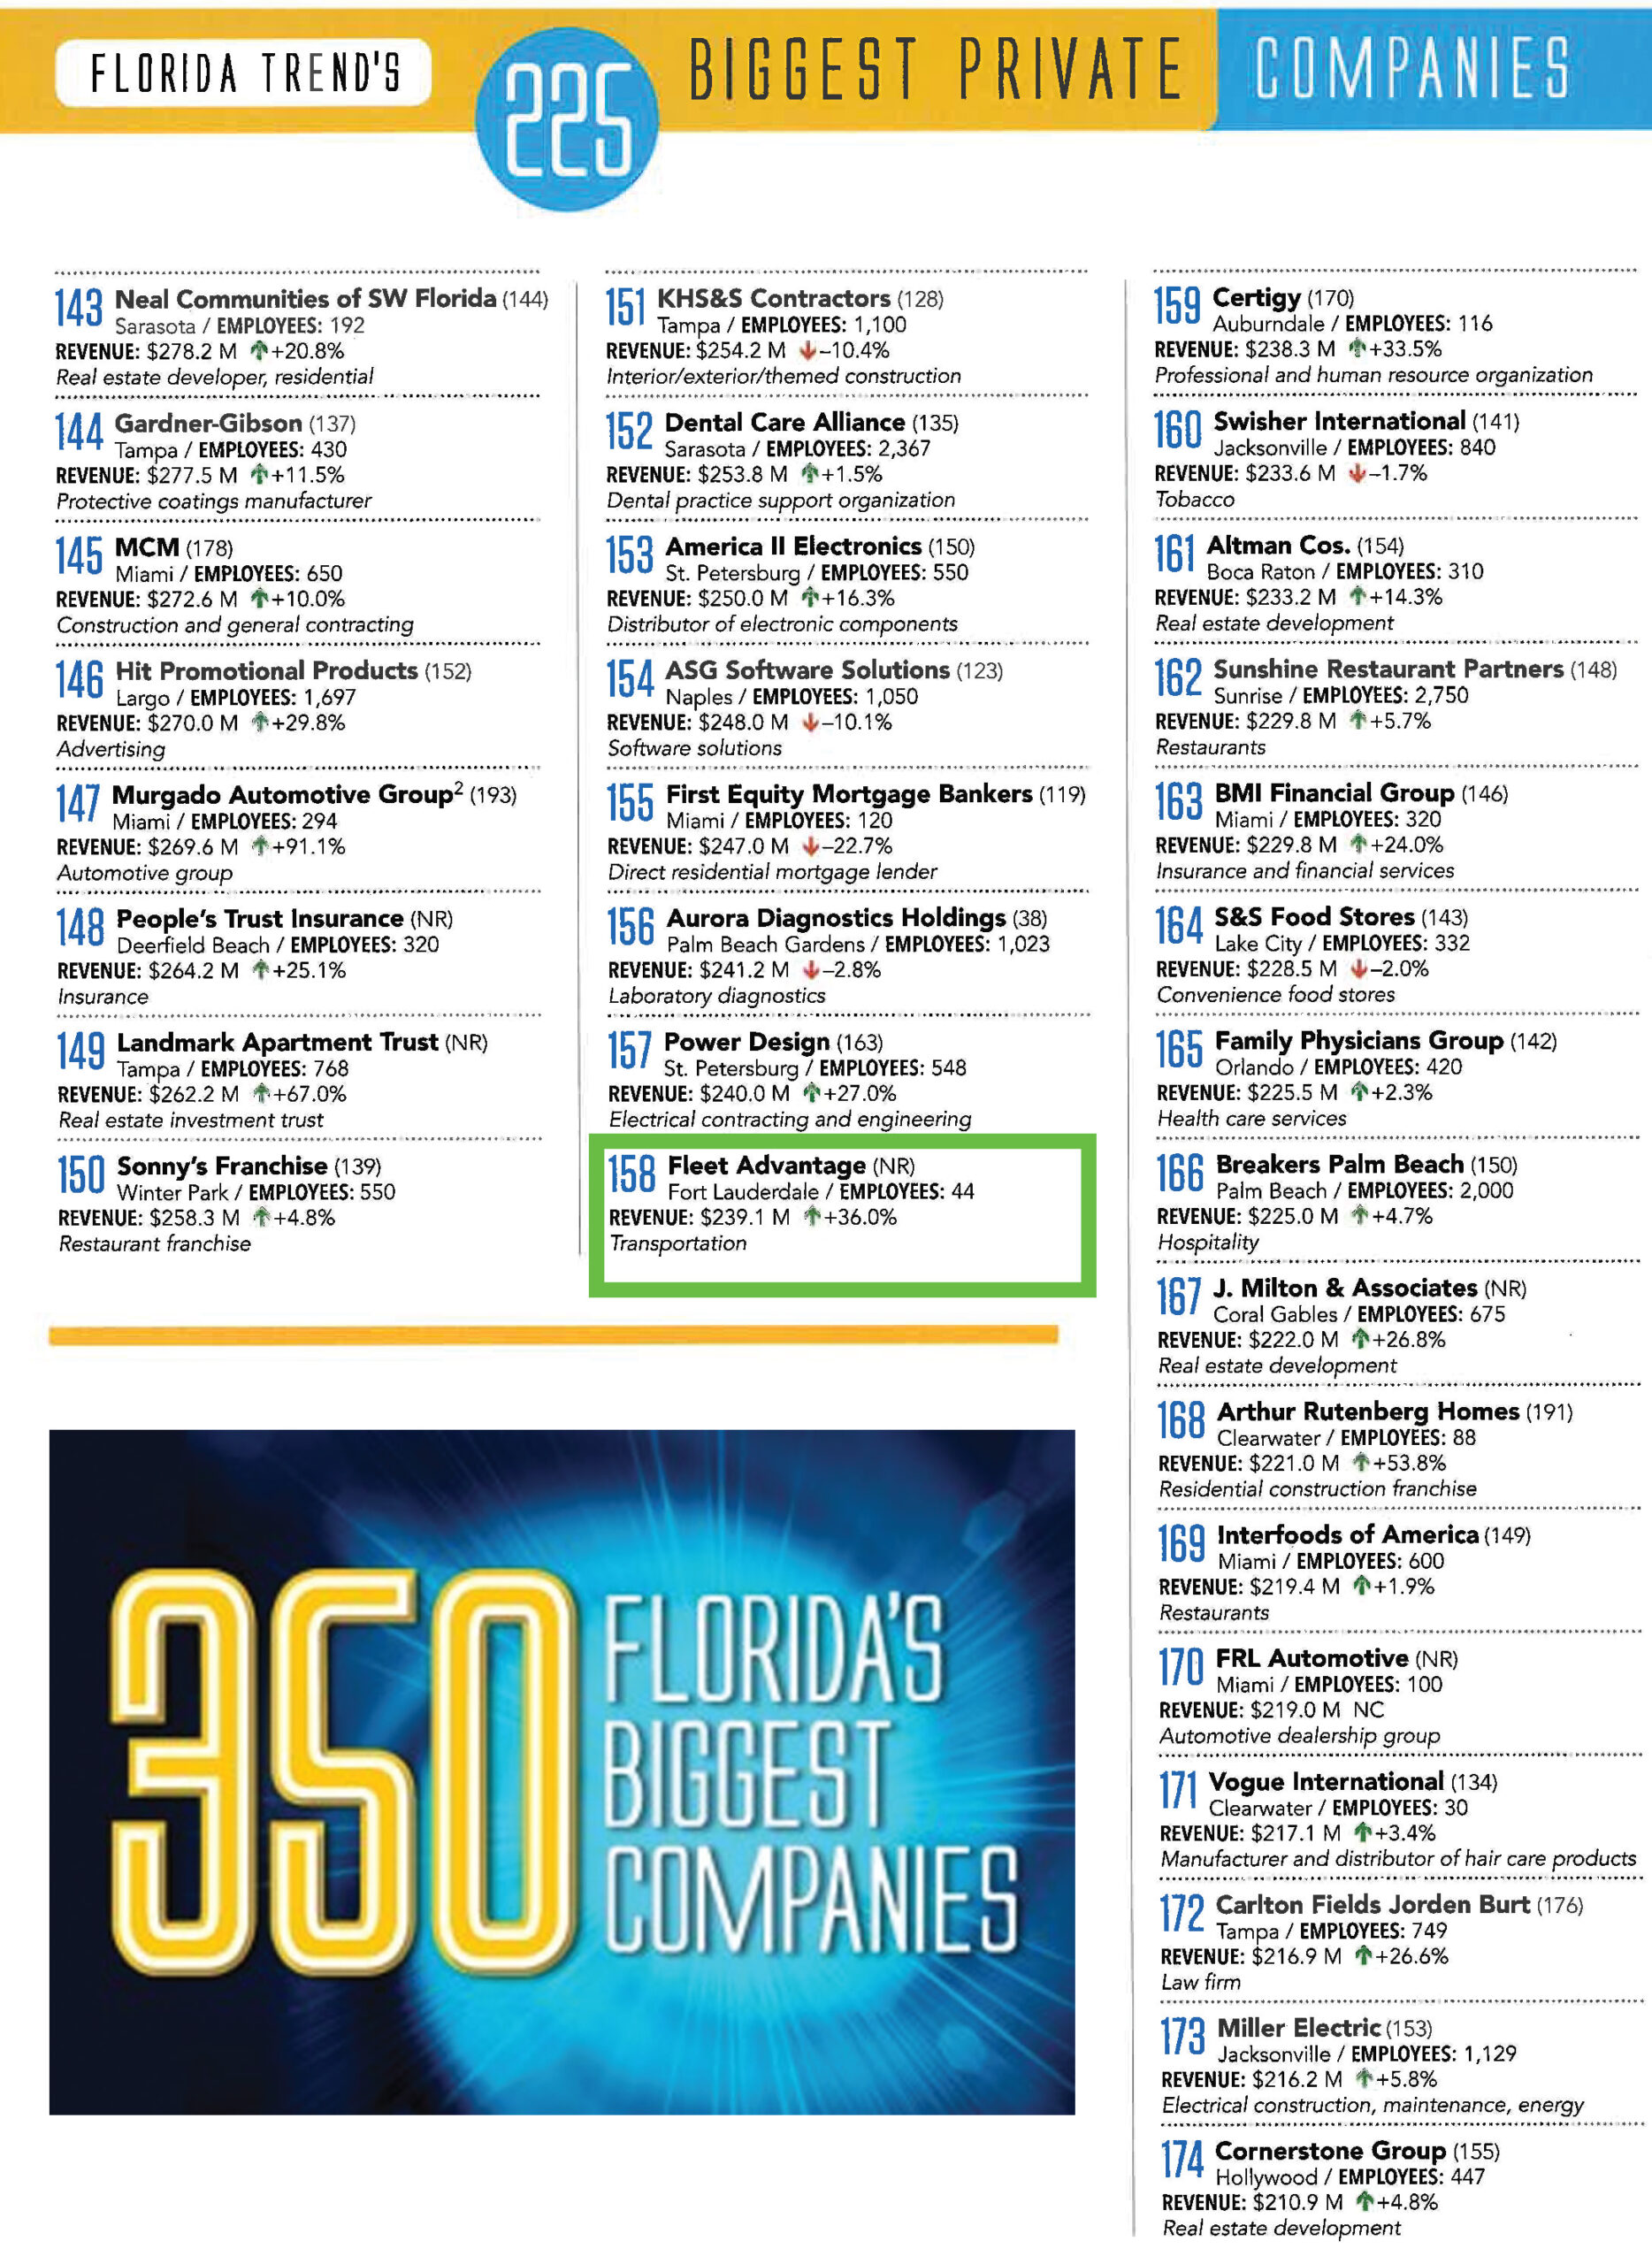 Fleet Advantage featured in the List of Florida Trend’s 225 Biggest Private Companies